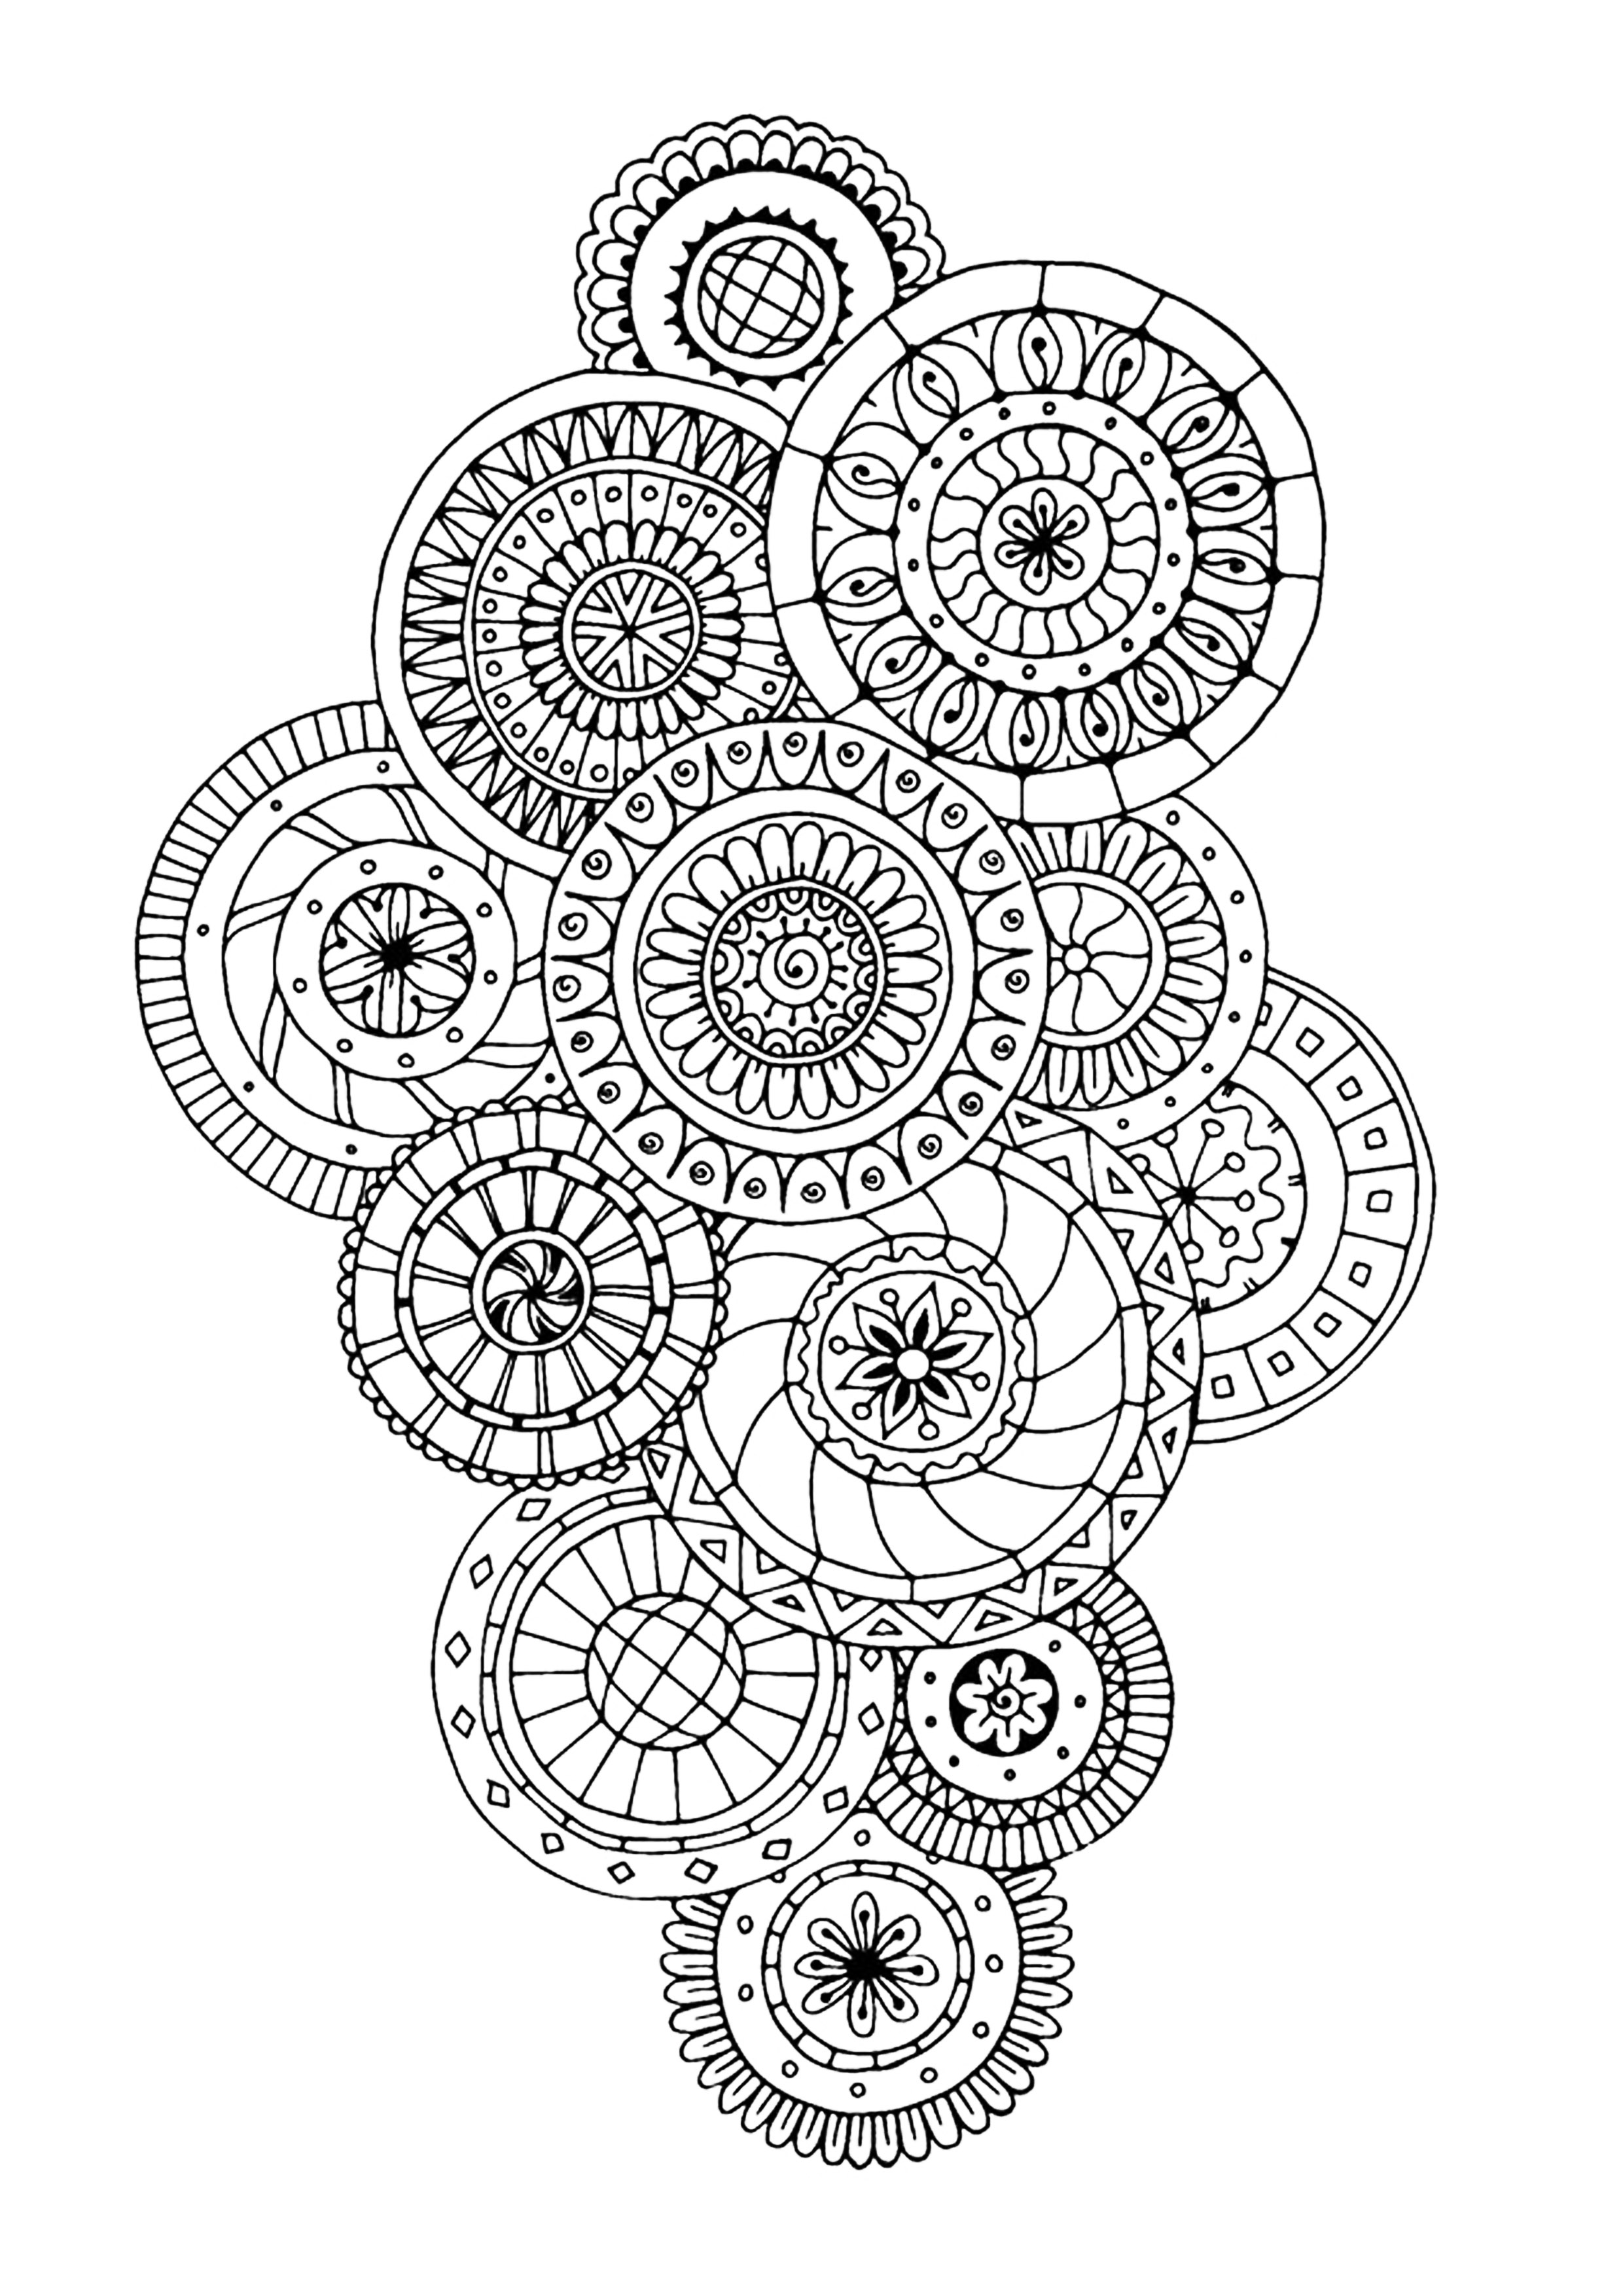 Zen antistress abstract pattern inspired Anti stress Adult Coloring Pages